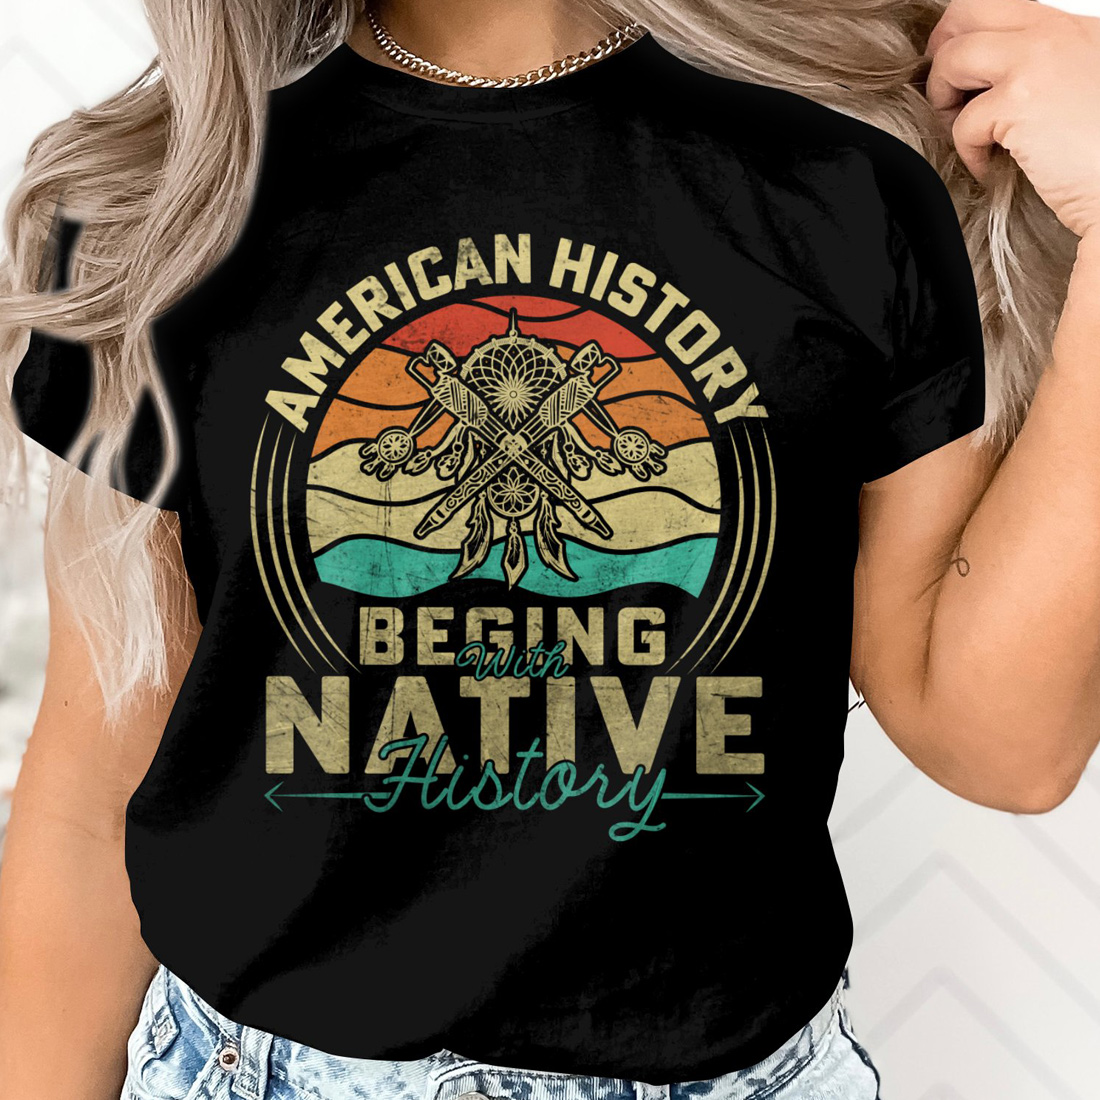 American History Begins with Native History, Native American T-Shirts, Native American Pride Shirts preview image.